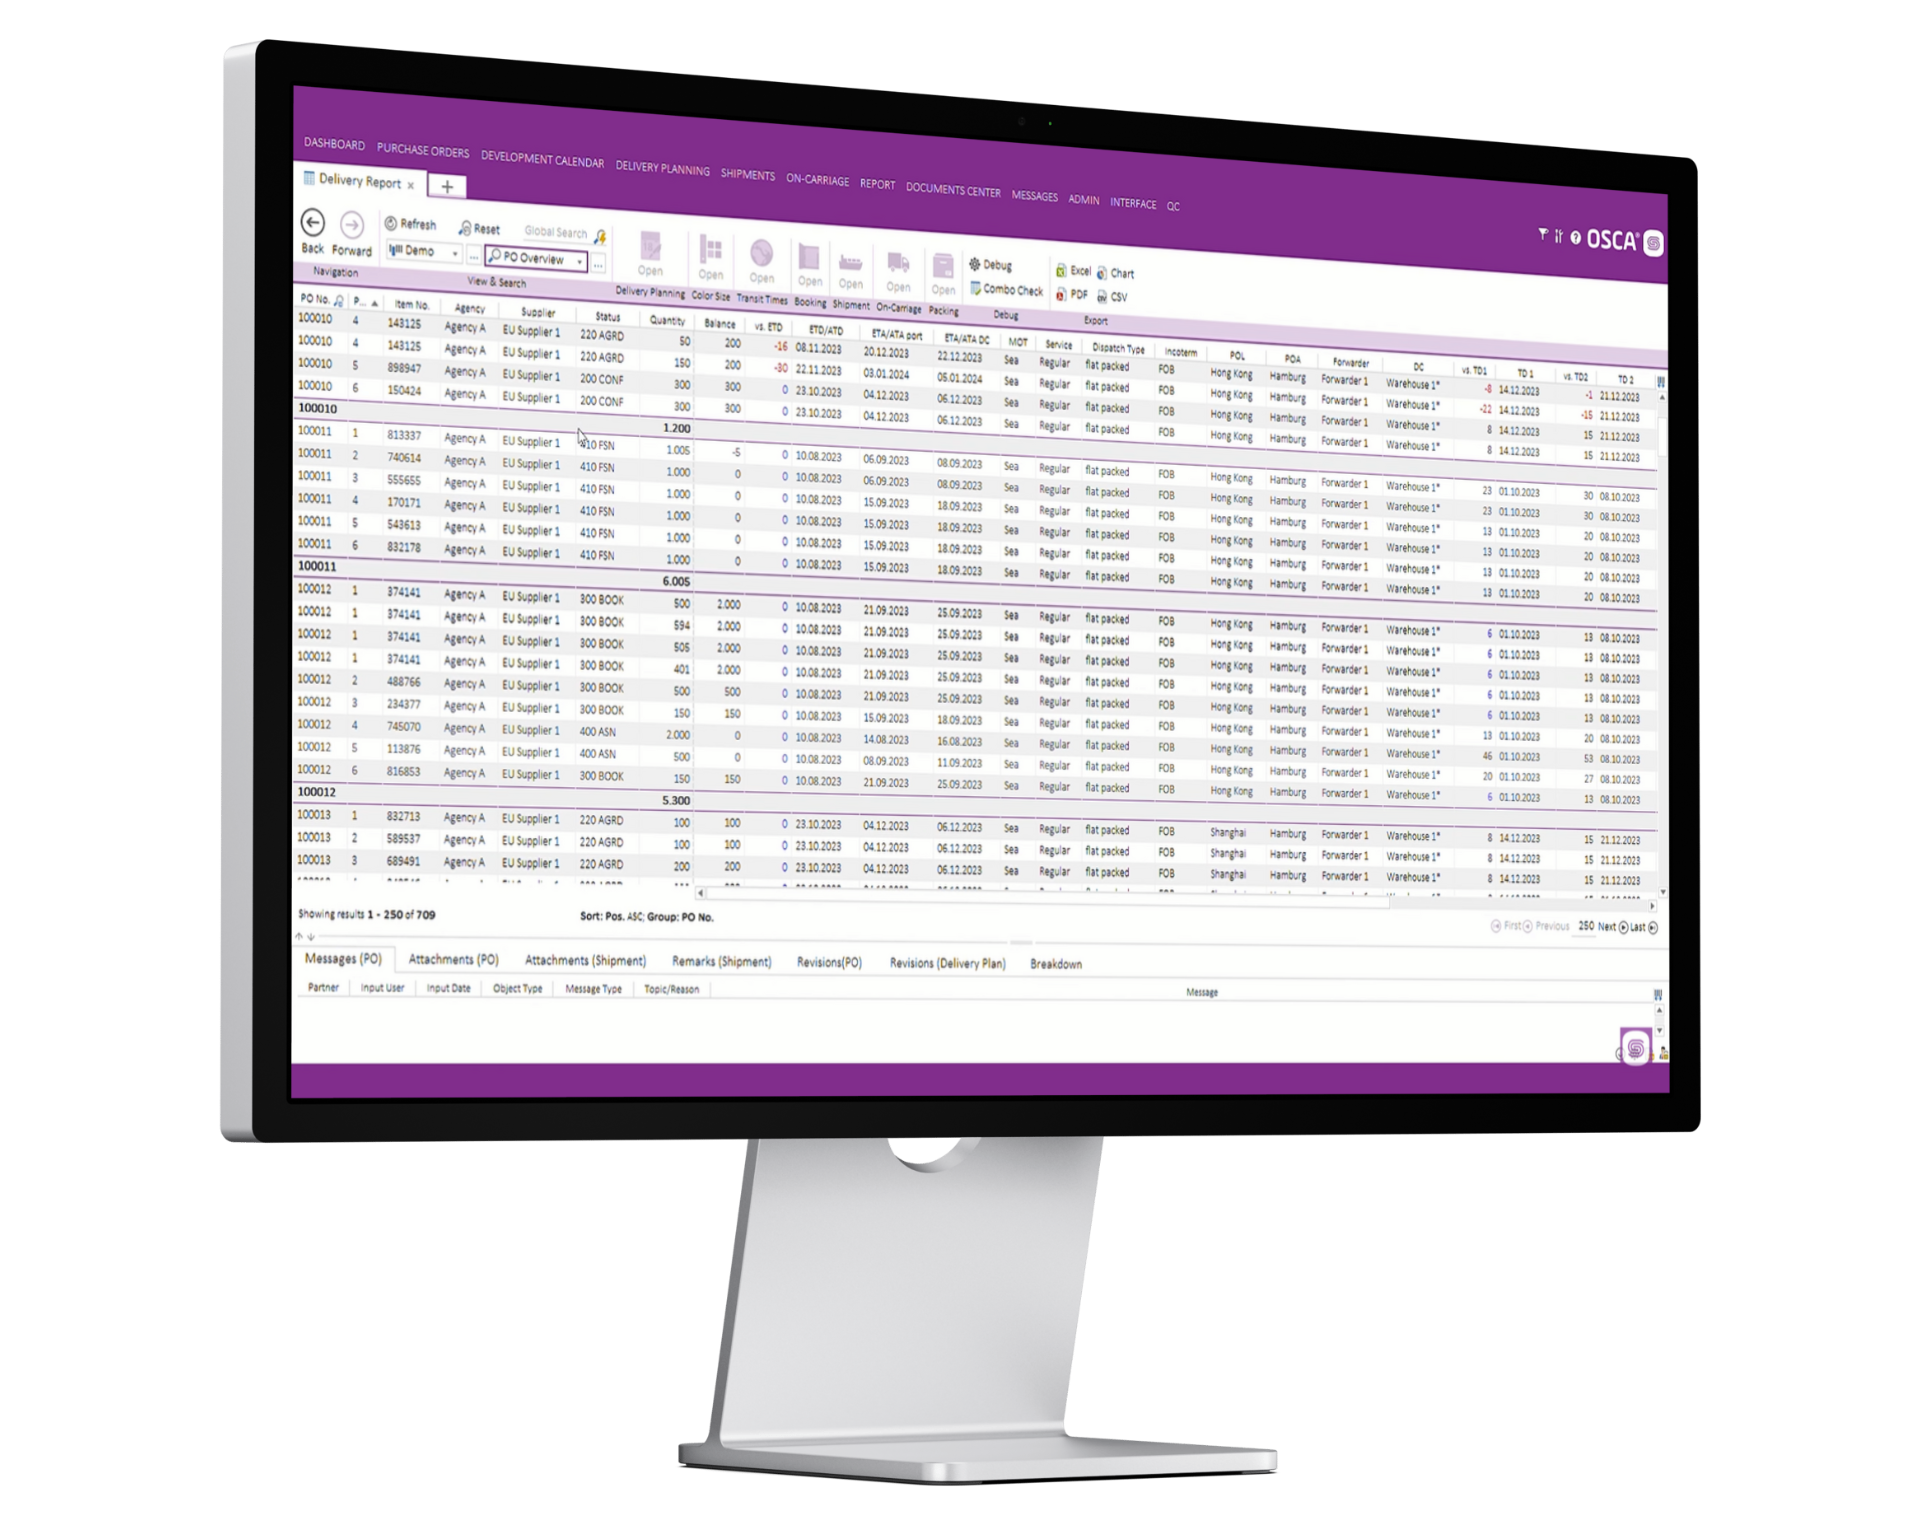 Monitor showing the process to optimize the Purchase Order Management with OSCA